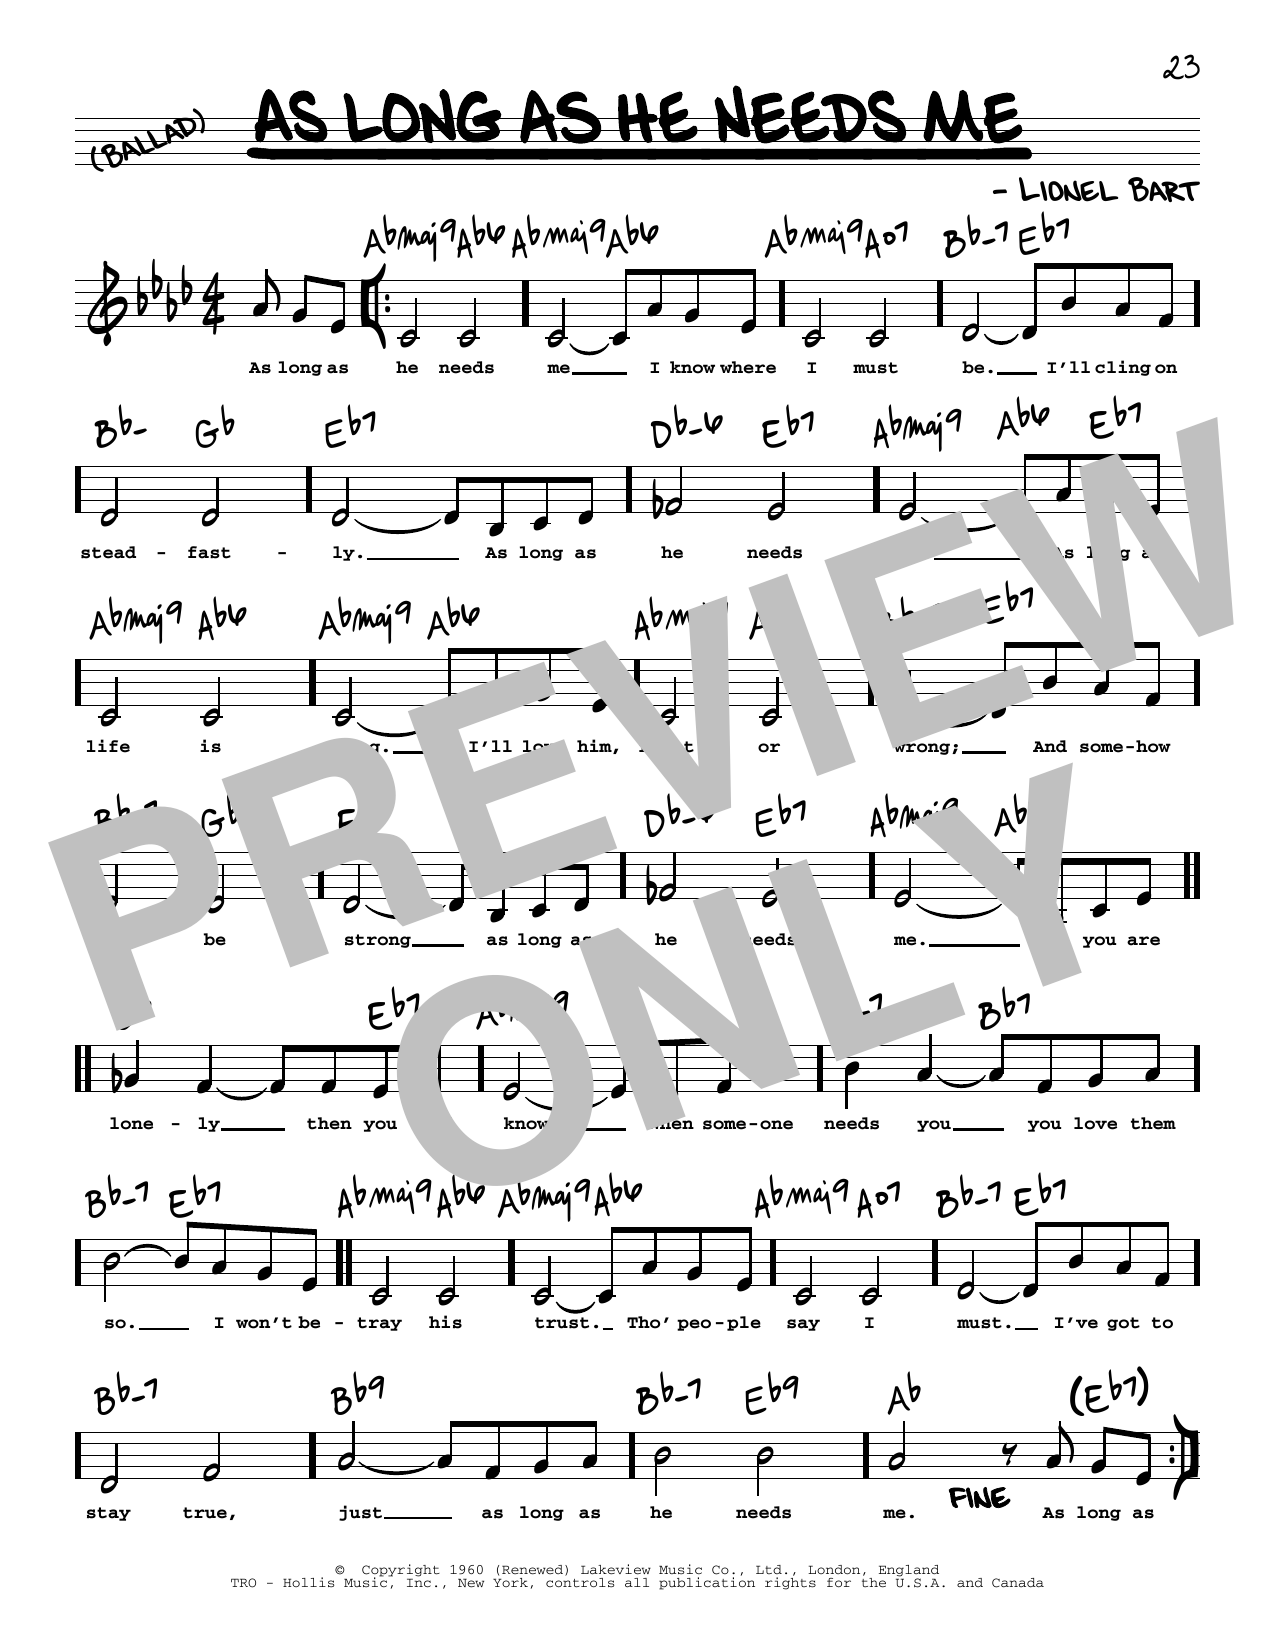 Lionel Bart As Long As He Needs Me (Low Voice) sheet music notes printable PDF score